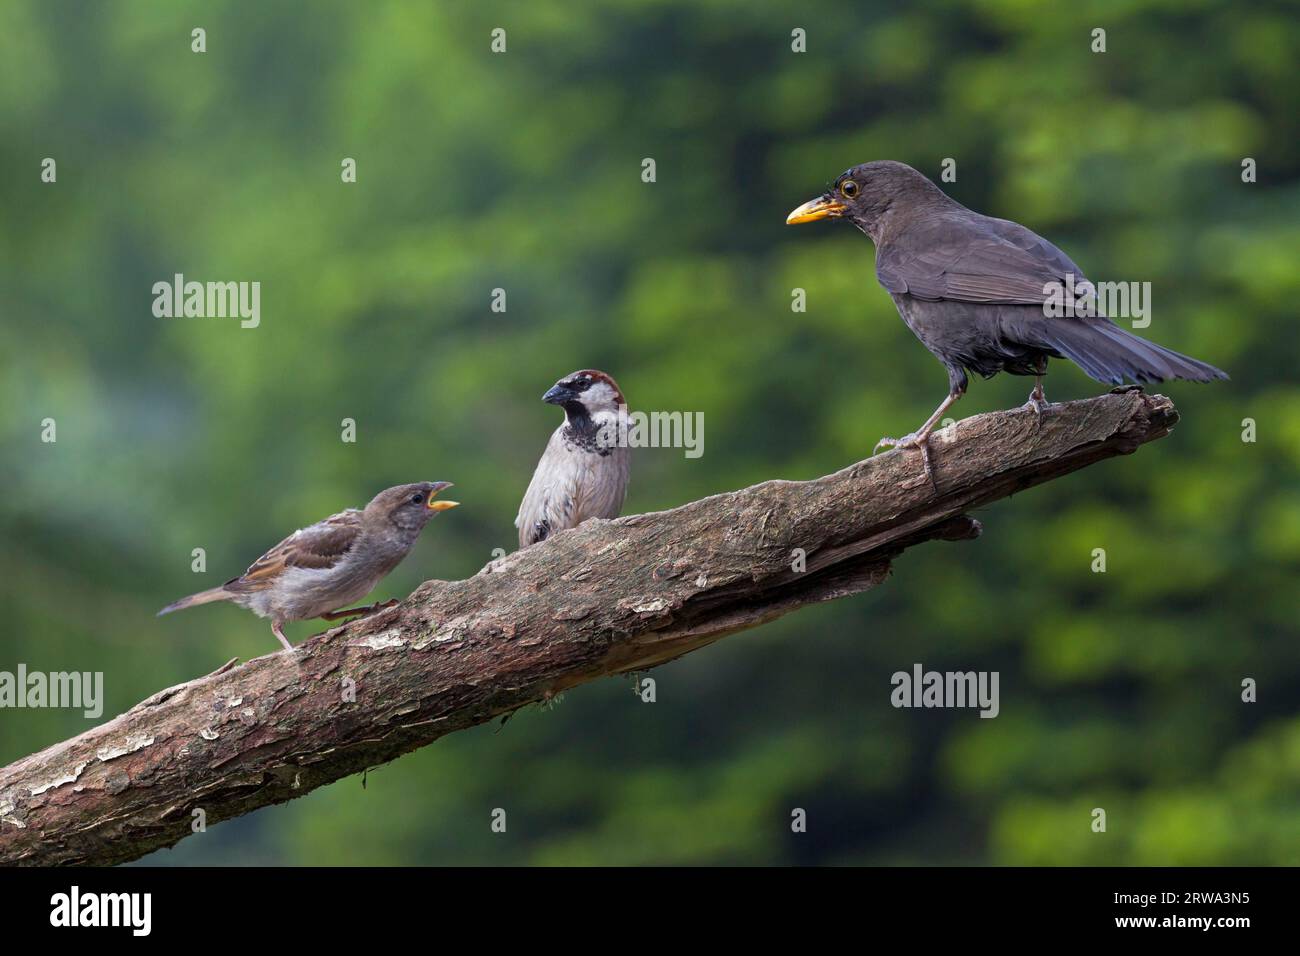 Blackbird and House Sparrows (Passer domesticus) sitting on a branch, Common Blackbird (Turdus merula) male and House Sparrows sitting on a branch Stock Photo